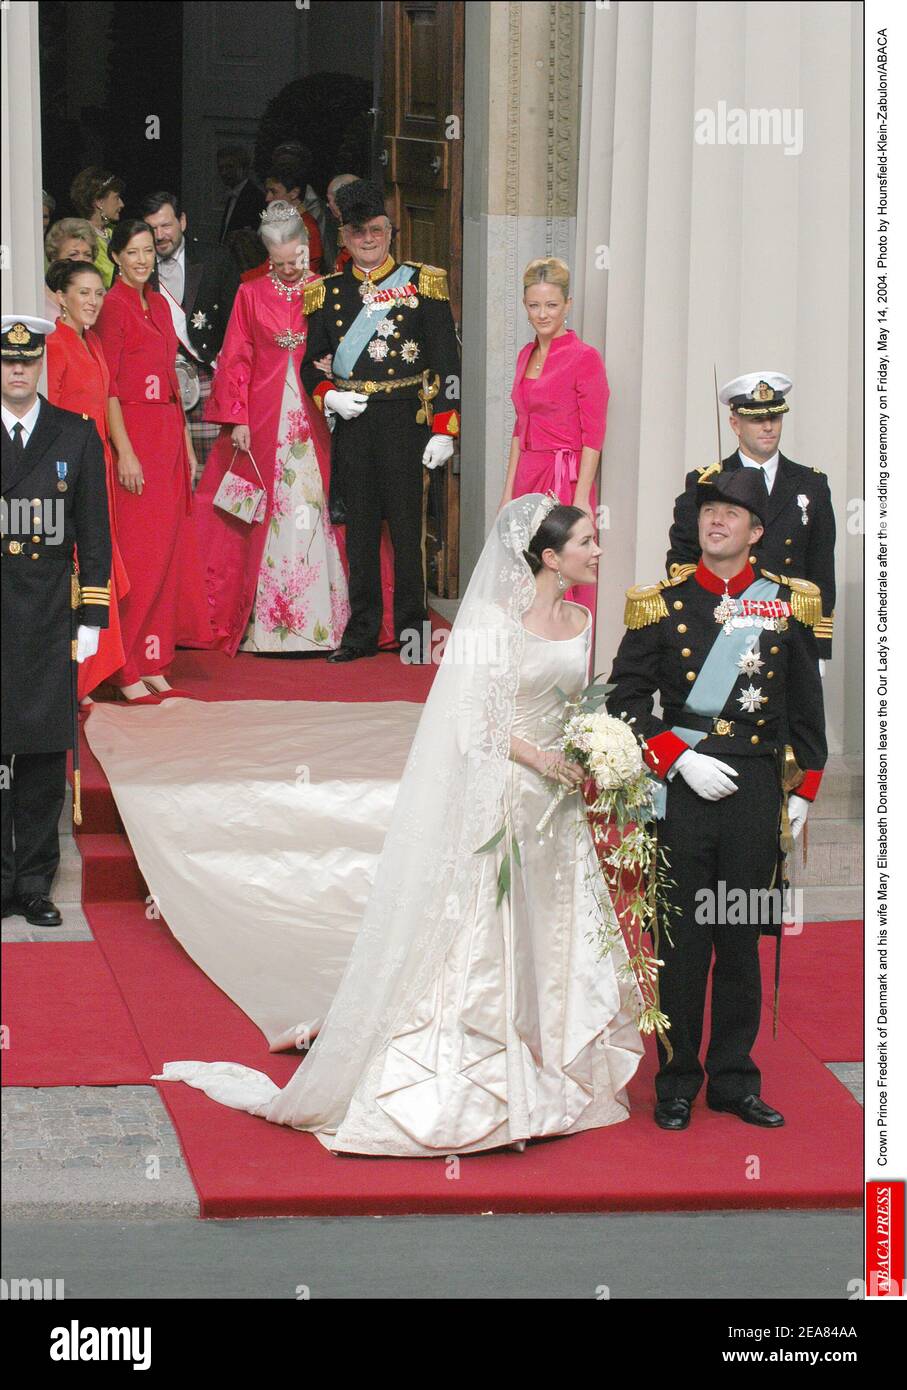 Crown Prince Frederik of Denmark and his wife Mary Elisabeth Donaldson leave the Our Lady's Cathedrale after the wedding ceremony on Friday, May 14, 2004. Photo by Hounsfield-Klein-Zabulon/ABACA Stock Photo